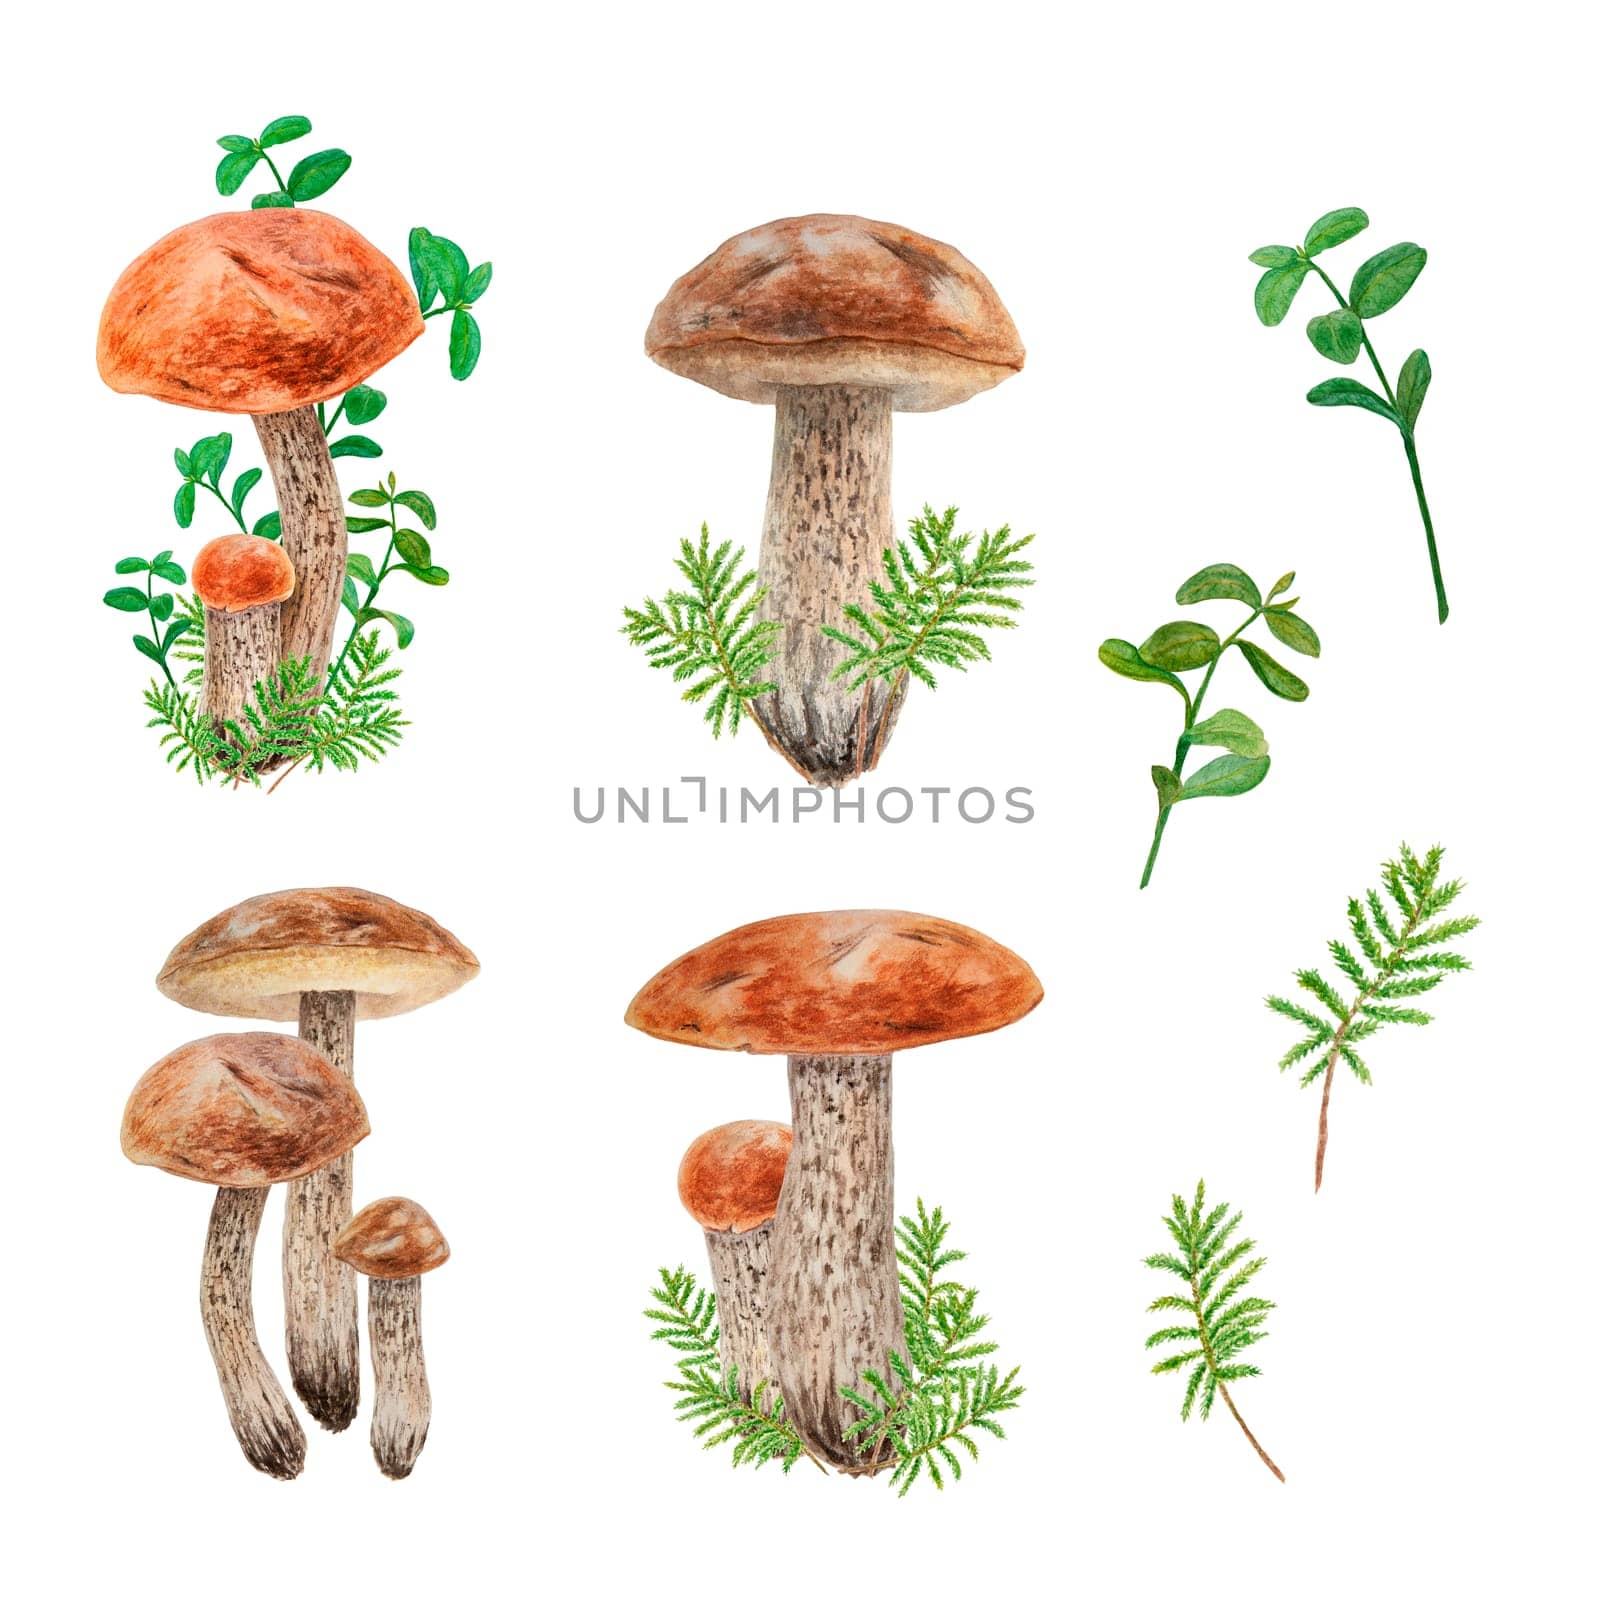 Clip art collection of forest green branches and edible mushrooms. Realistic watercolor botanical illustrations of juisy cranberry, cowberry and boletus for prints, fabric, postcards, menus, sticker by florainlove_art